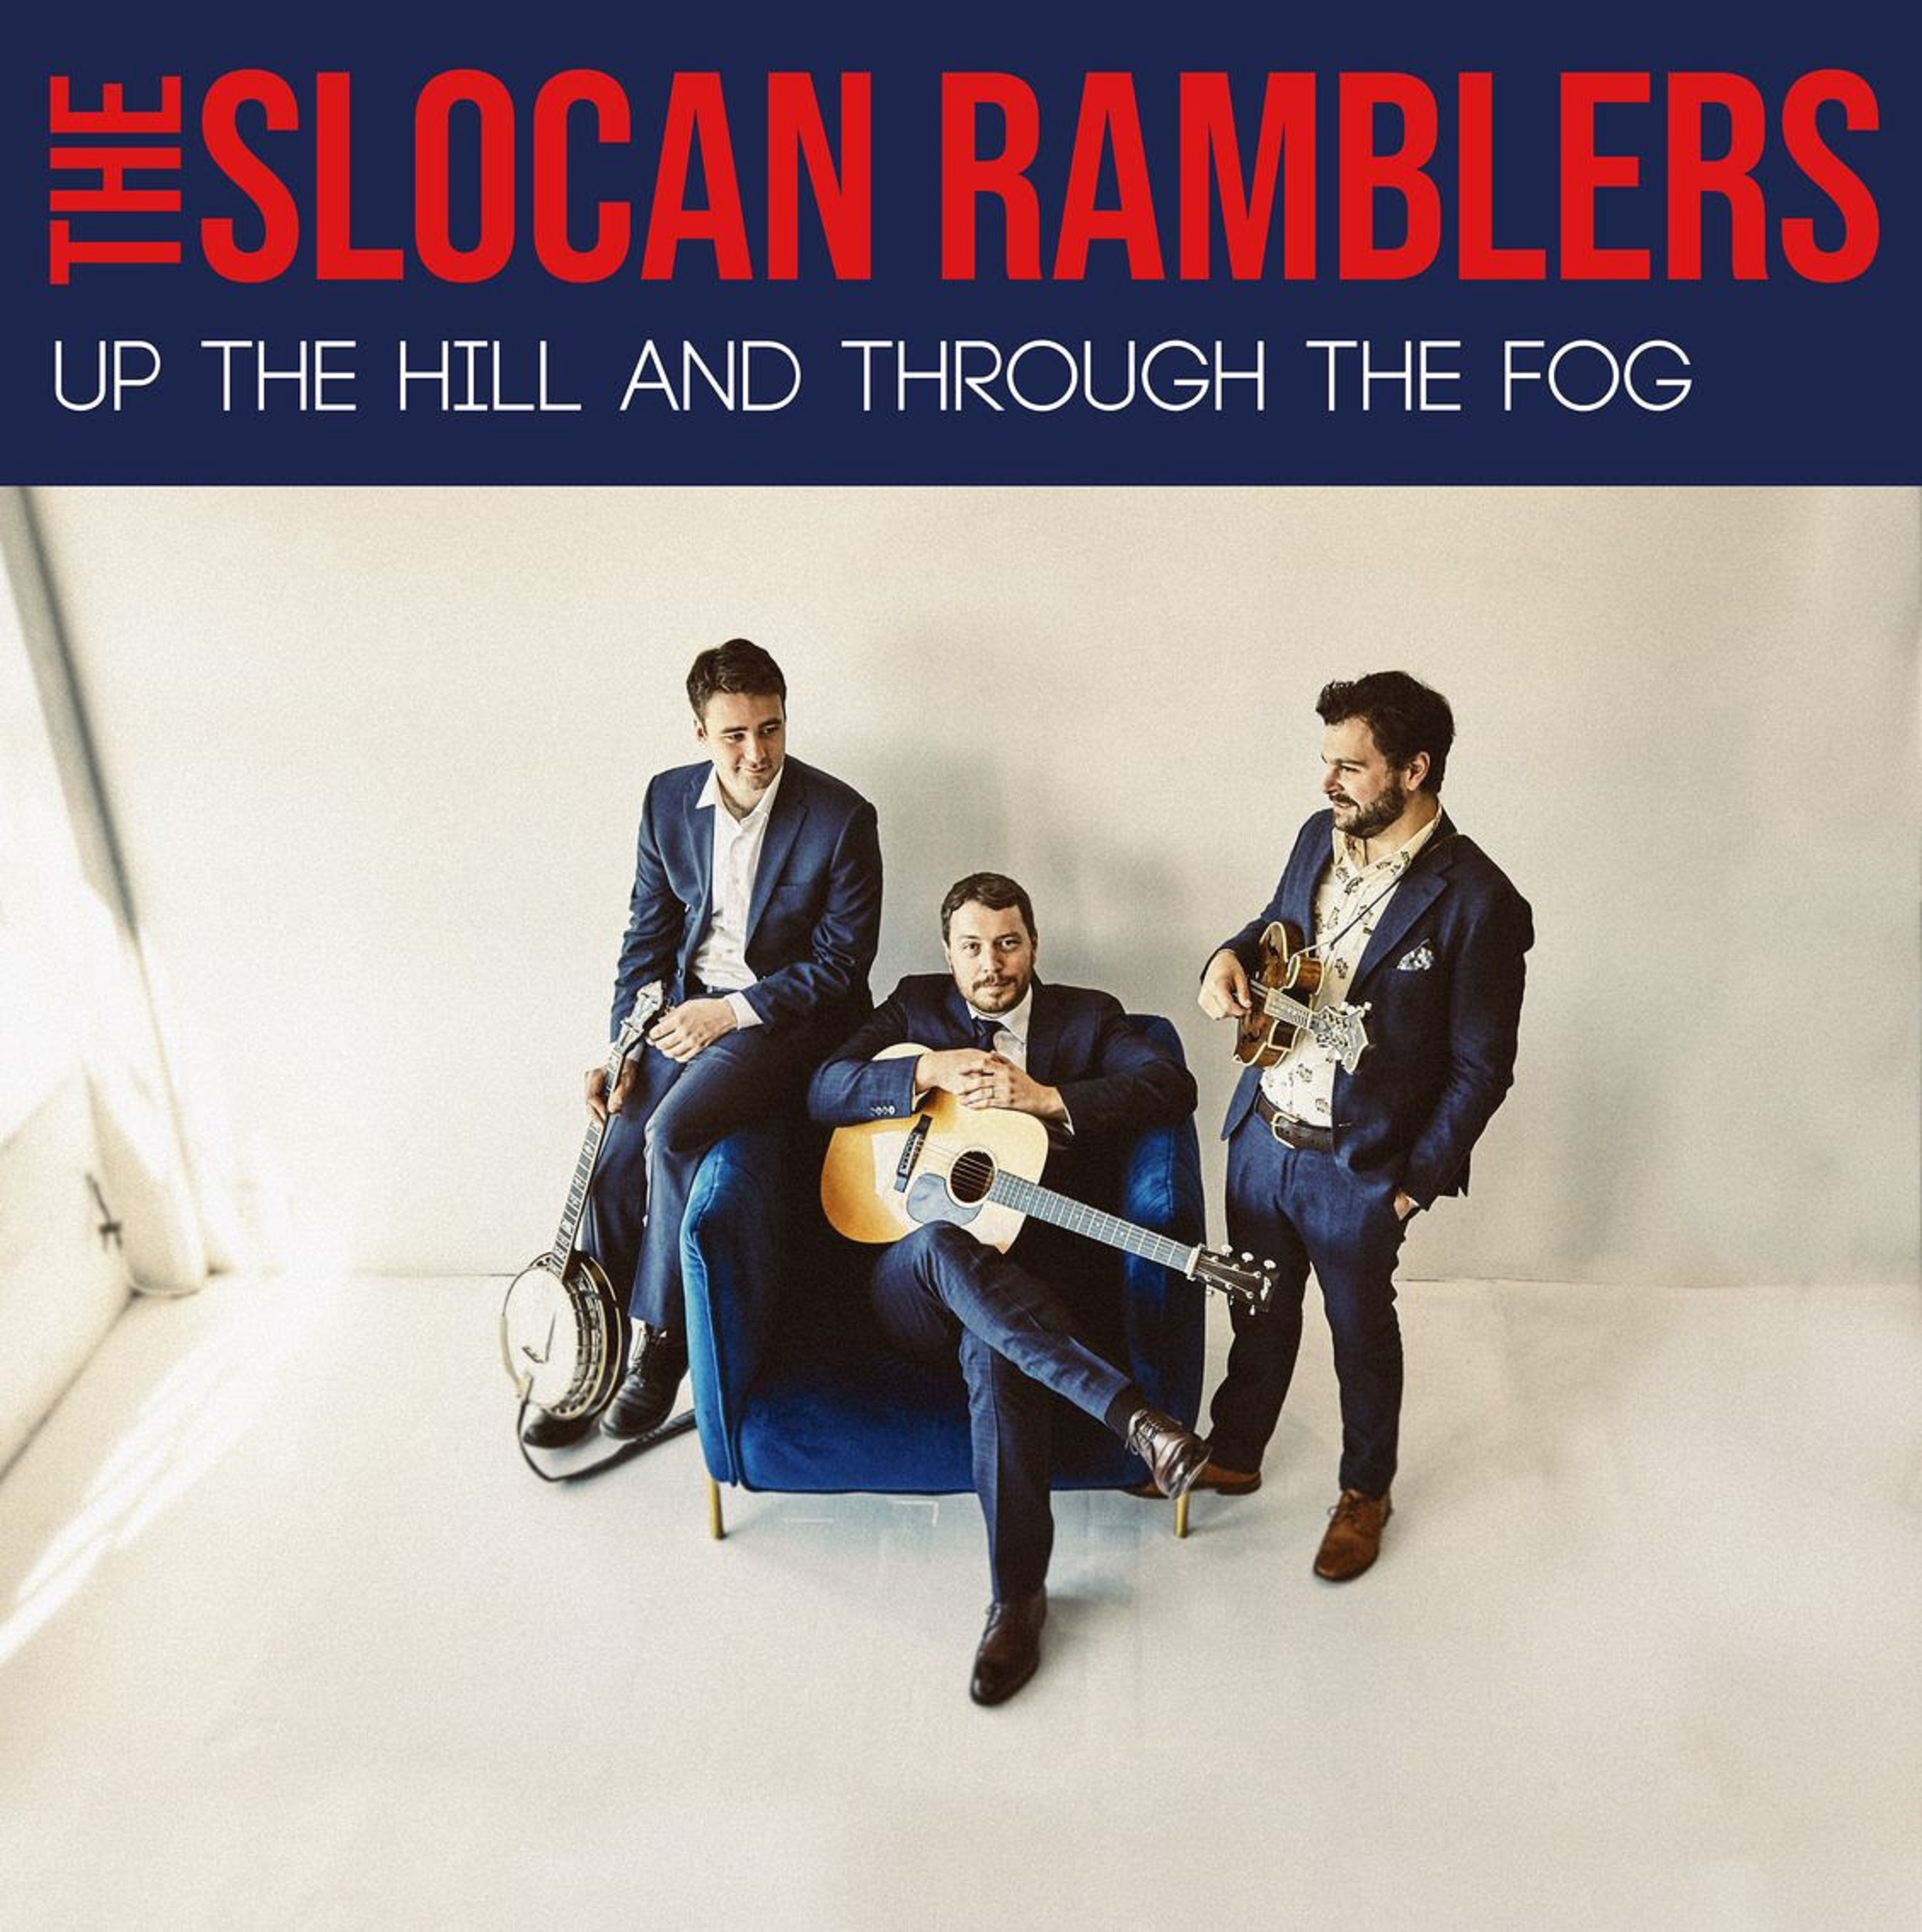 The Slocan Ramblers Announce New Album, Drop Fiery Tom Petty Cover